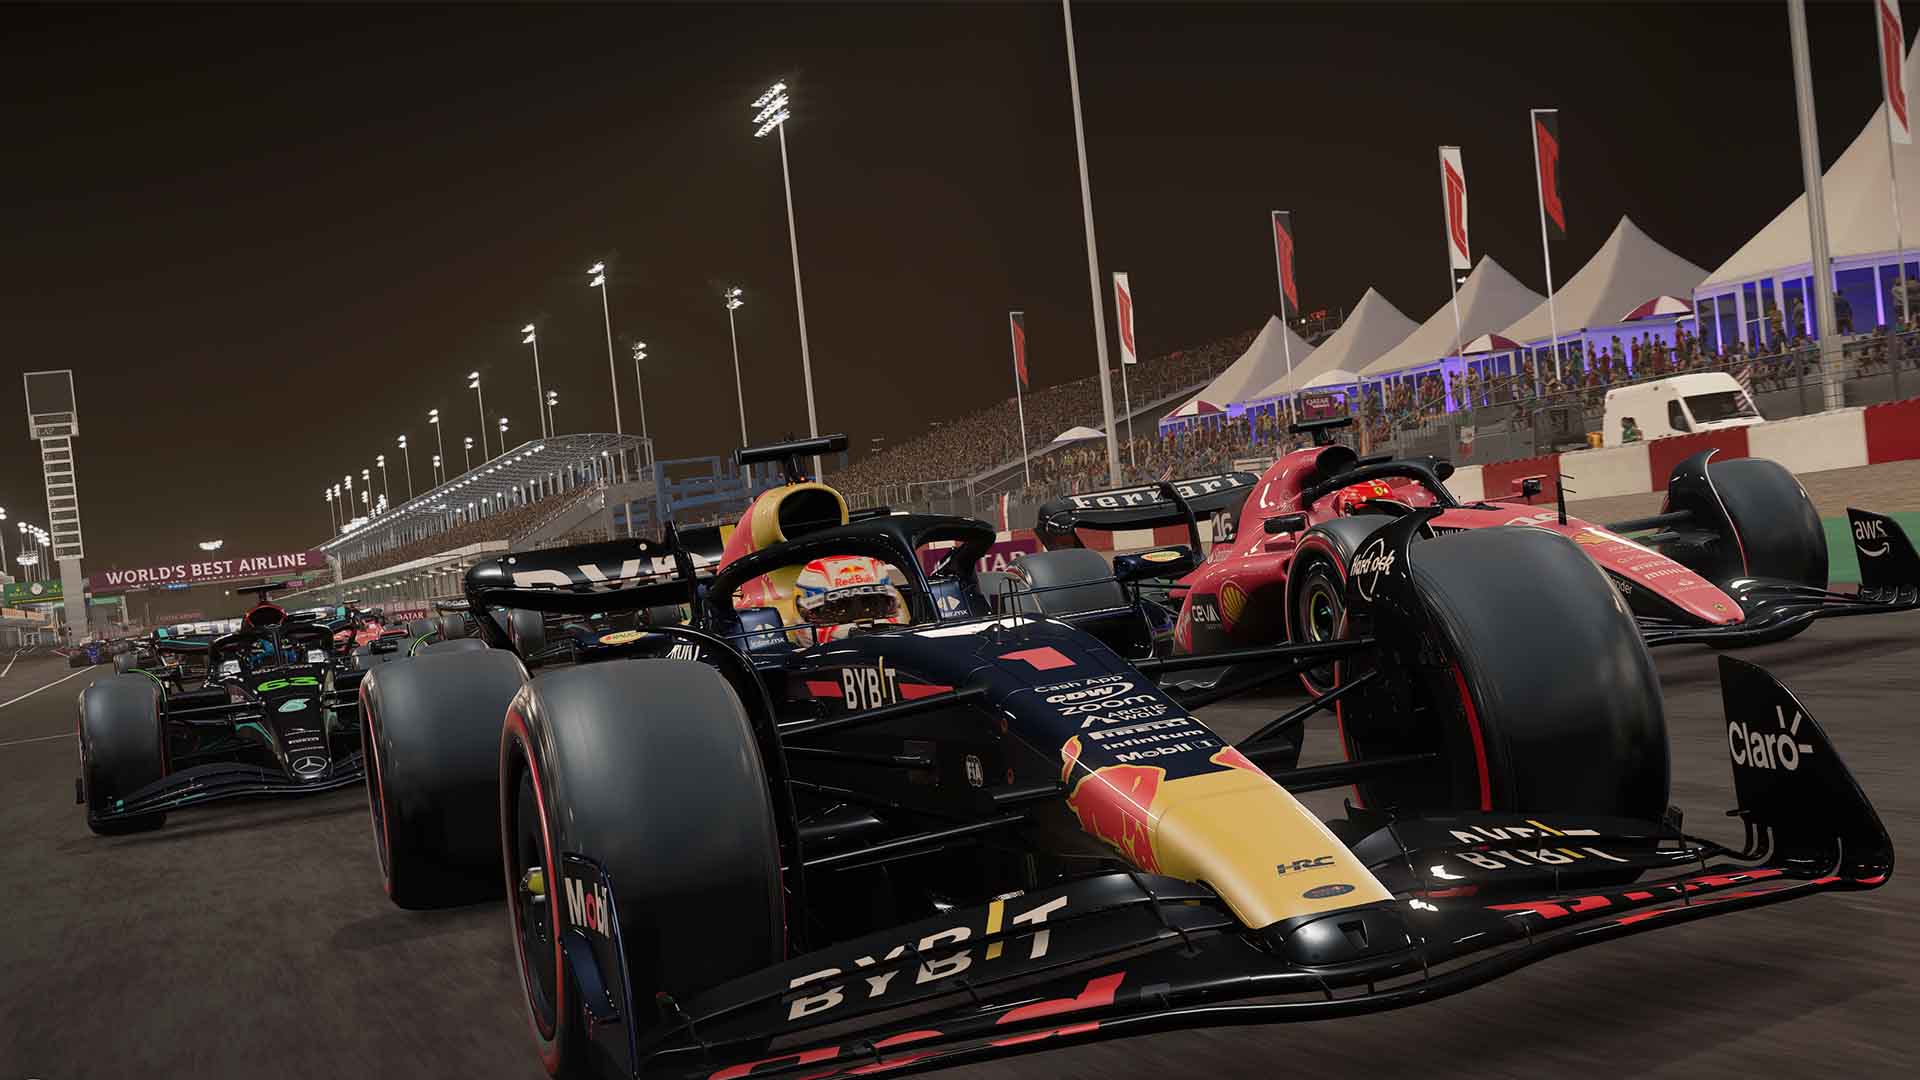 EA Sports F1 23 gets a deep dive trailer into new "innovations